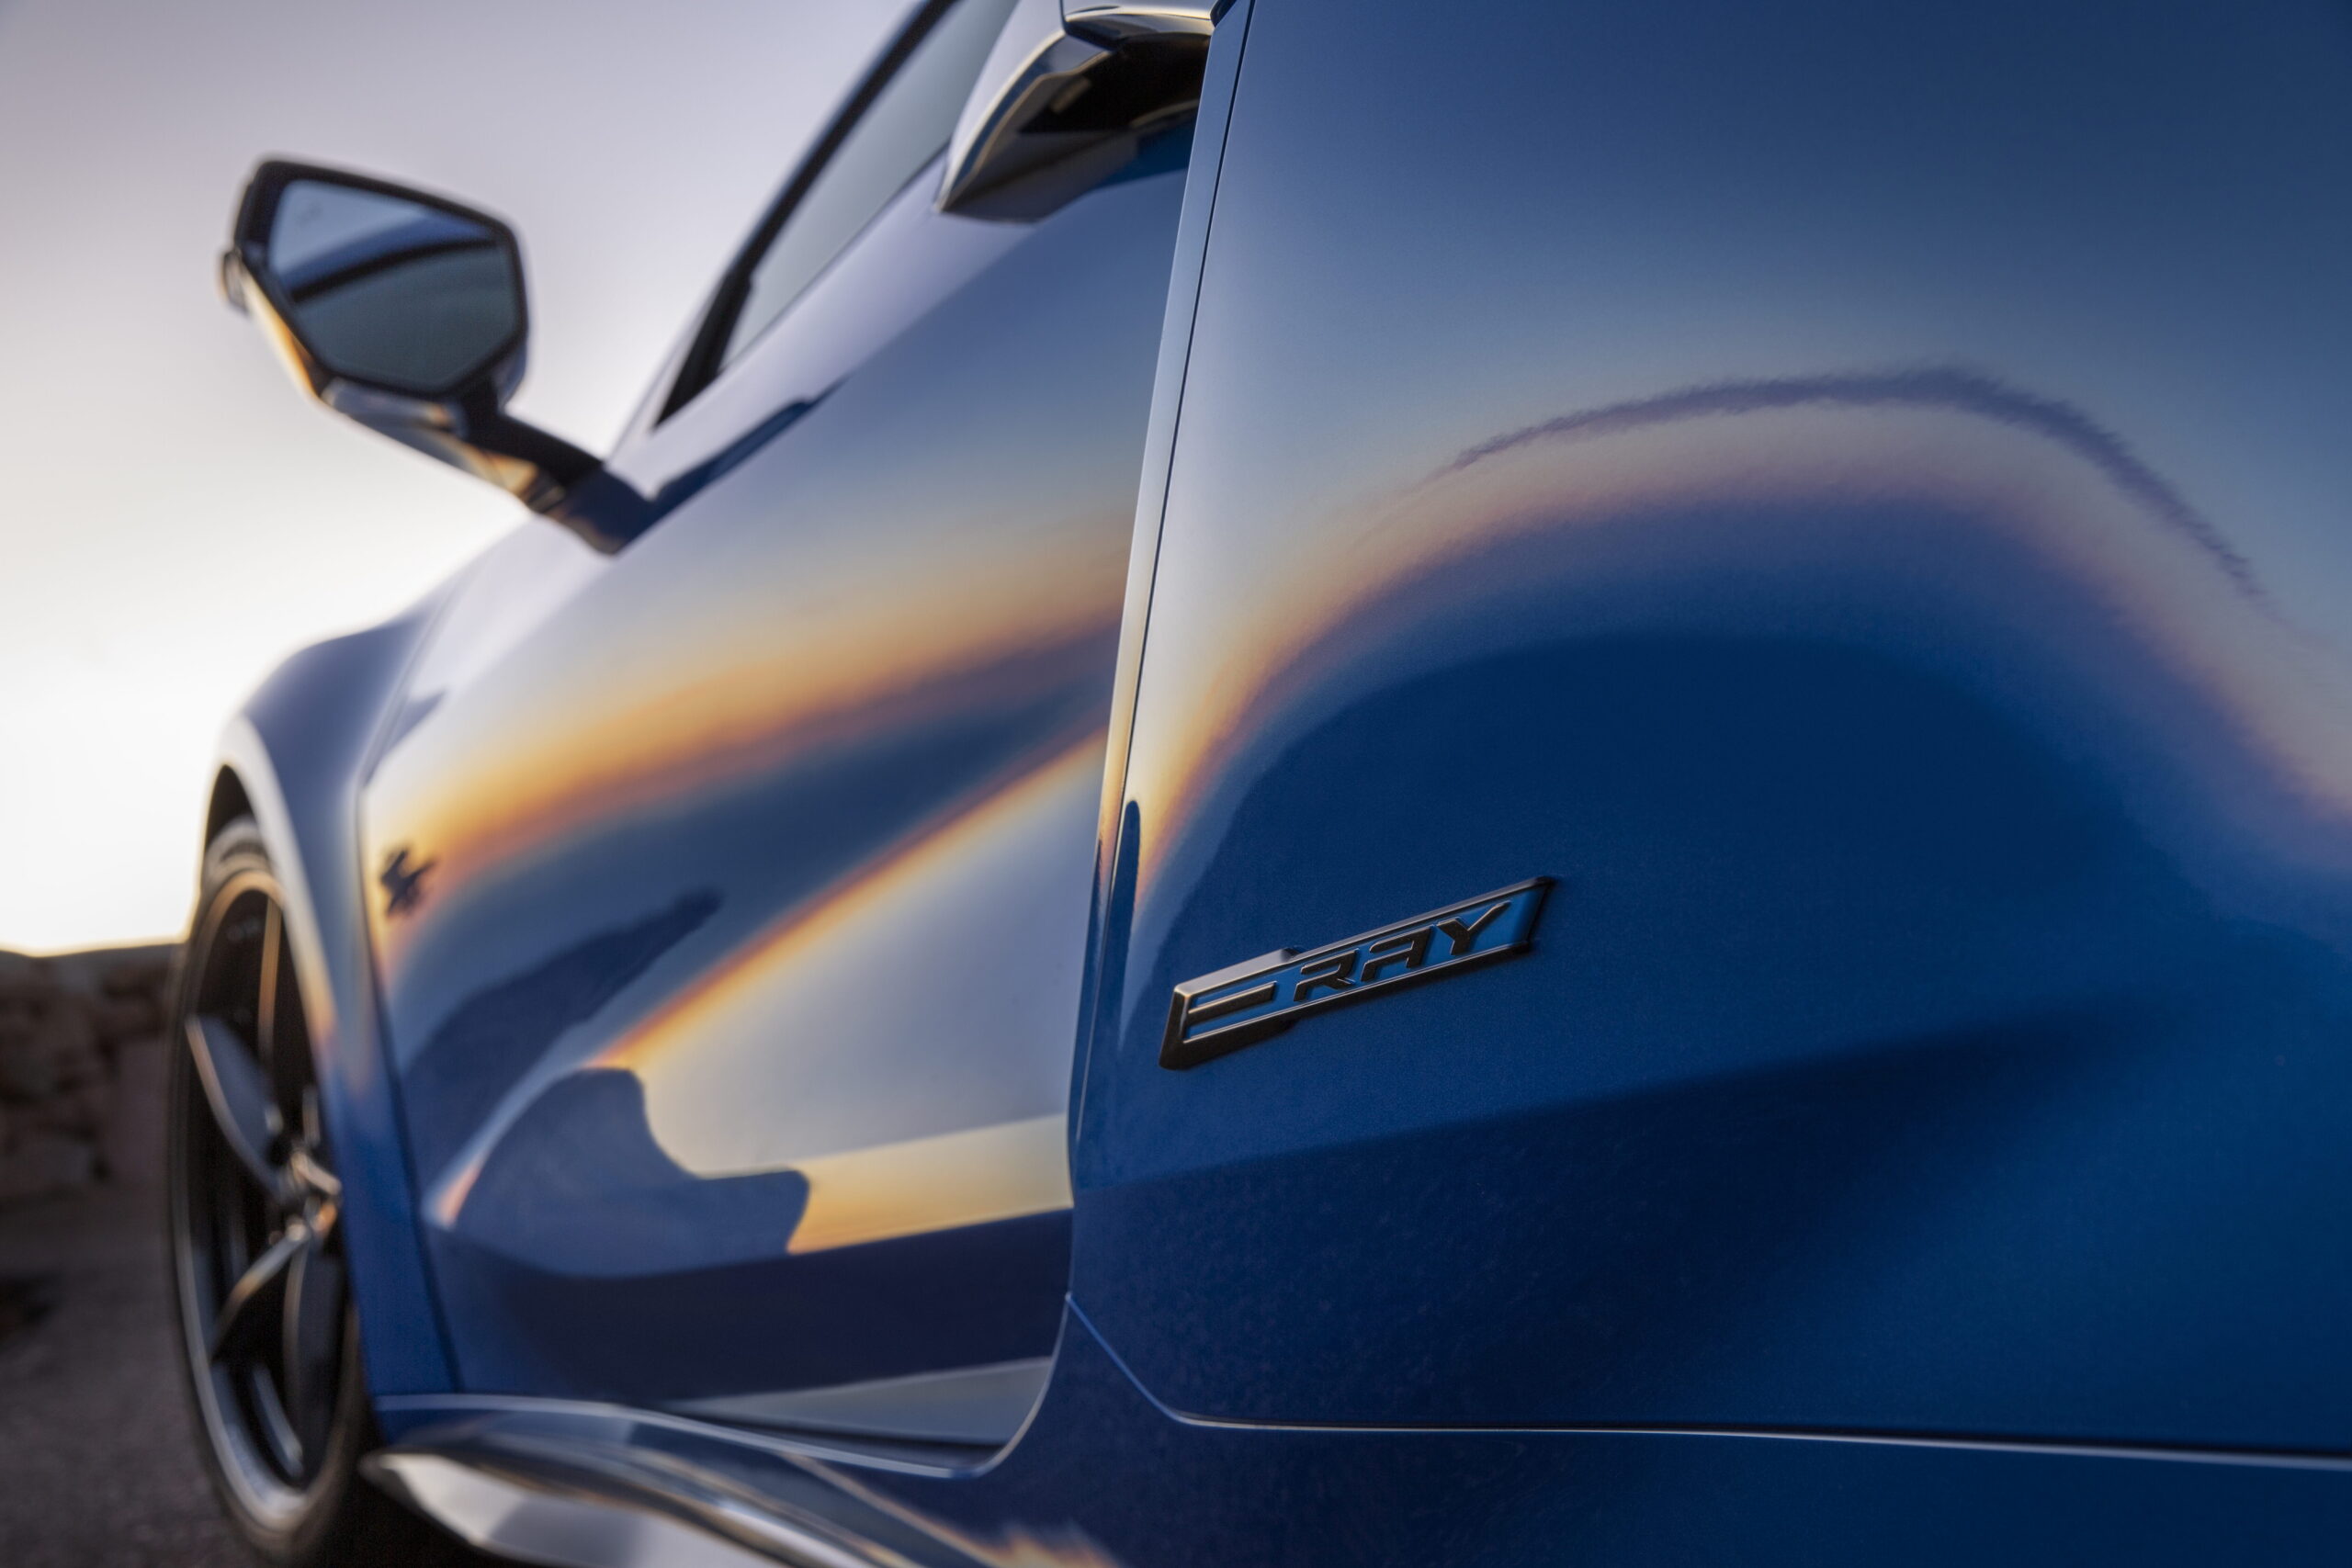 Close-up of the E-Ray badge on a 2024 Corvette E-Ray 3LZ coupe in Riptide Blue Metallic. Pre-production model shown. Actual production model may vary. Model year 2024 Corvette E-Ray available 2023.